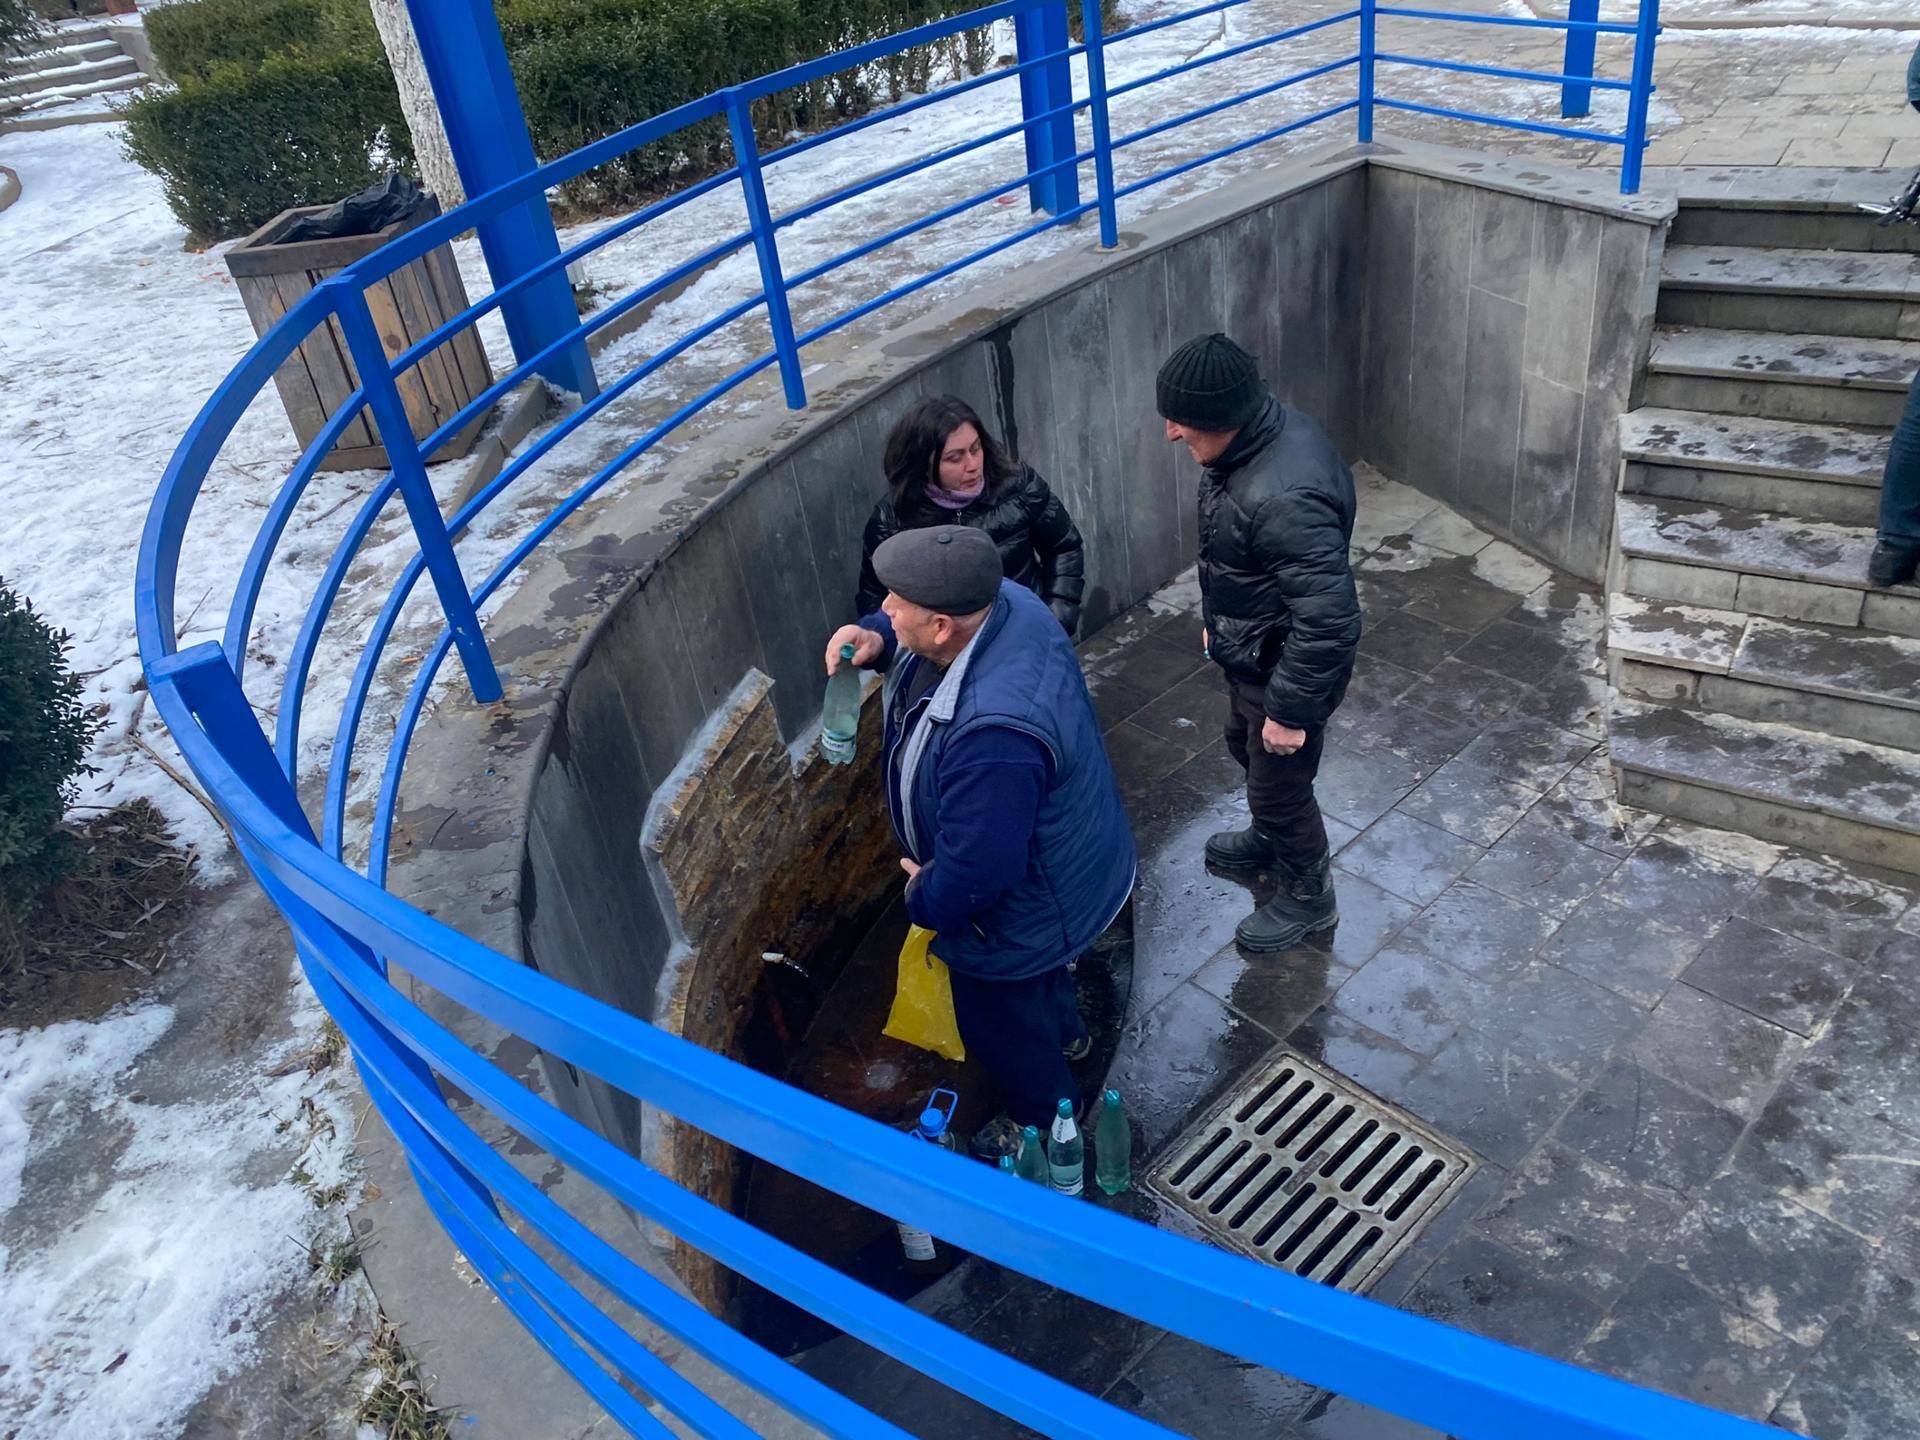 Locals in the Georgian town of Borjomi frequent one of several public springs to fill up their own bottles with the town's beloved mineral water.